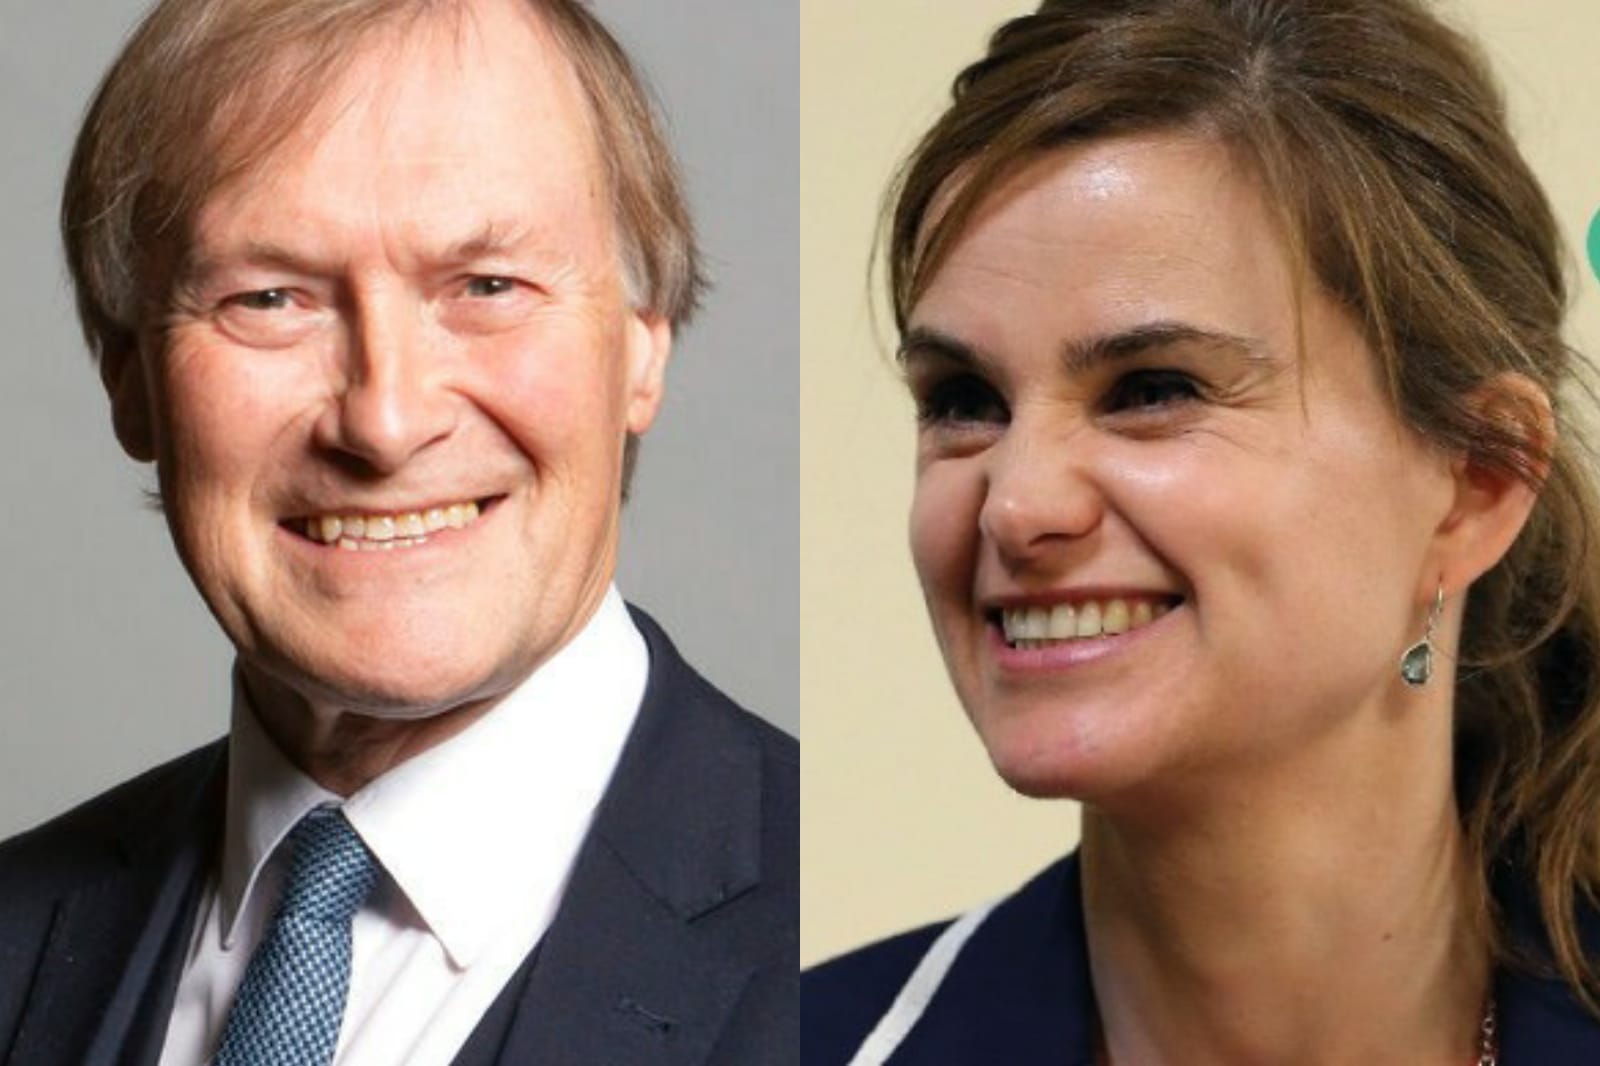 David Amess murder harks back to Jo Coxs killing, triggers sense of insecurity